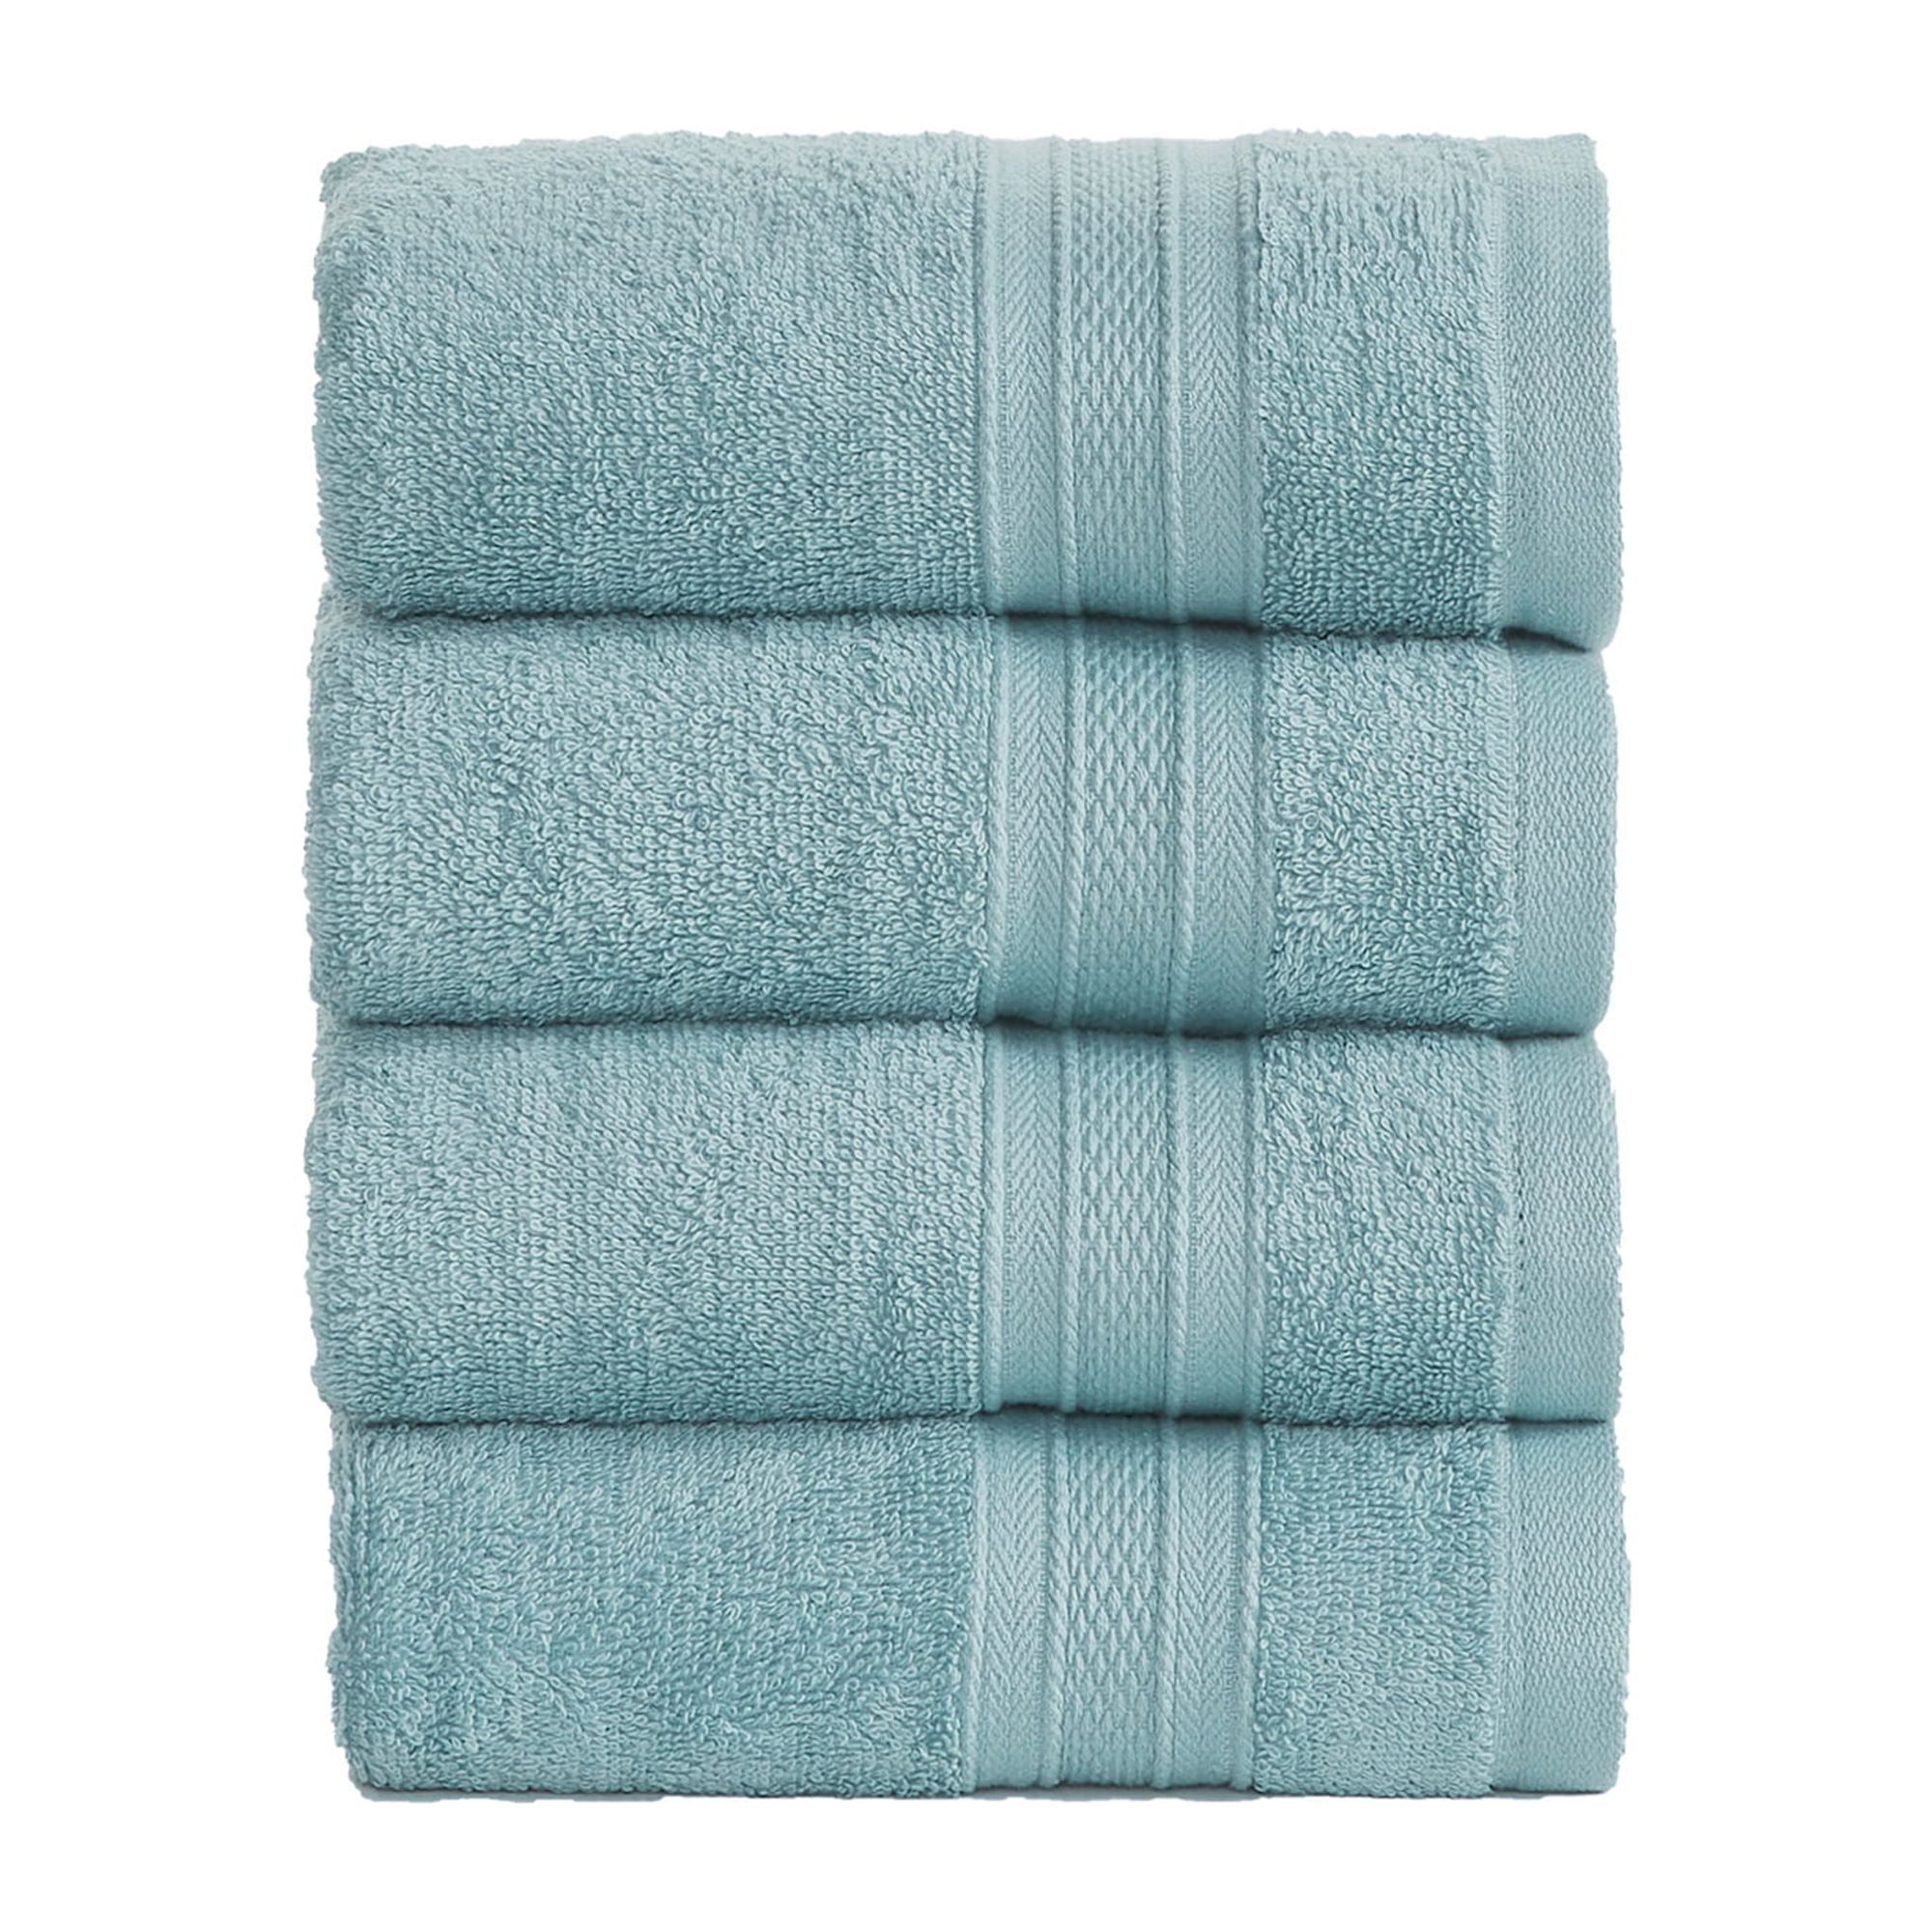 Trident 100% Cotton Feather Touch Towels, 6 Piece Set - 2 Bath Towels, 2 Hand Towels, 2 Washcloths, Super Soft and Highly Absorbent, Soft & Plush